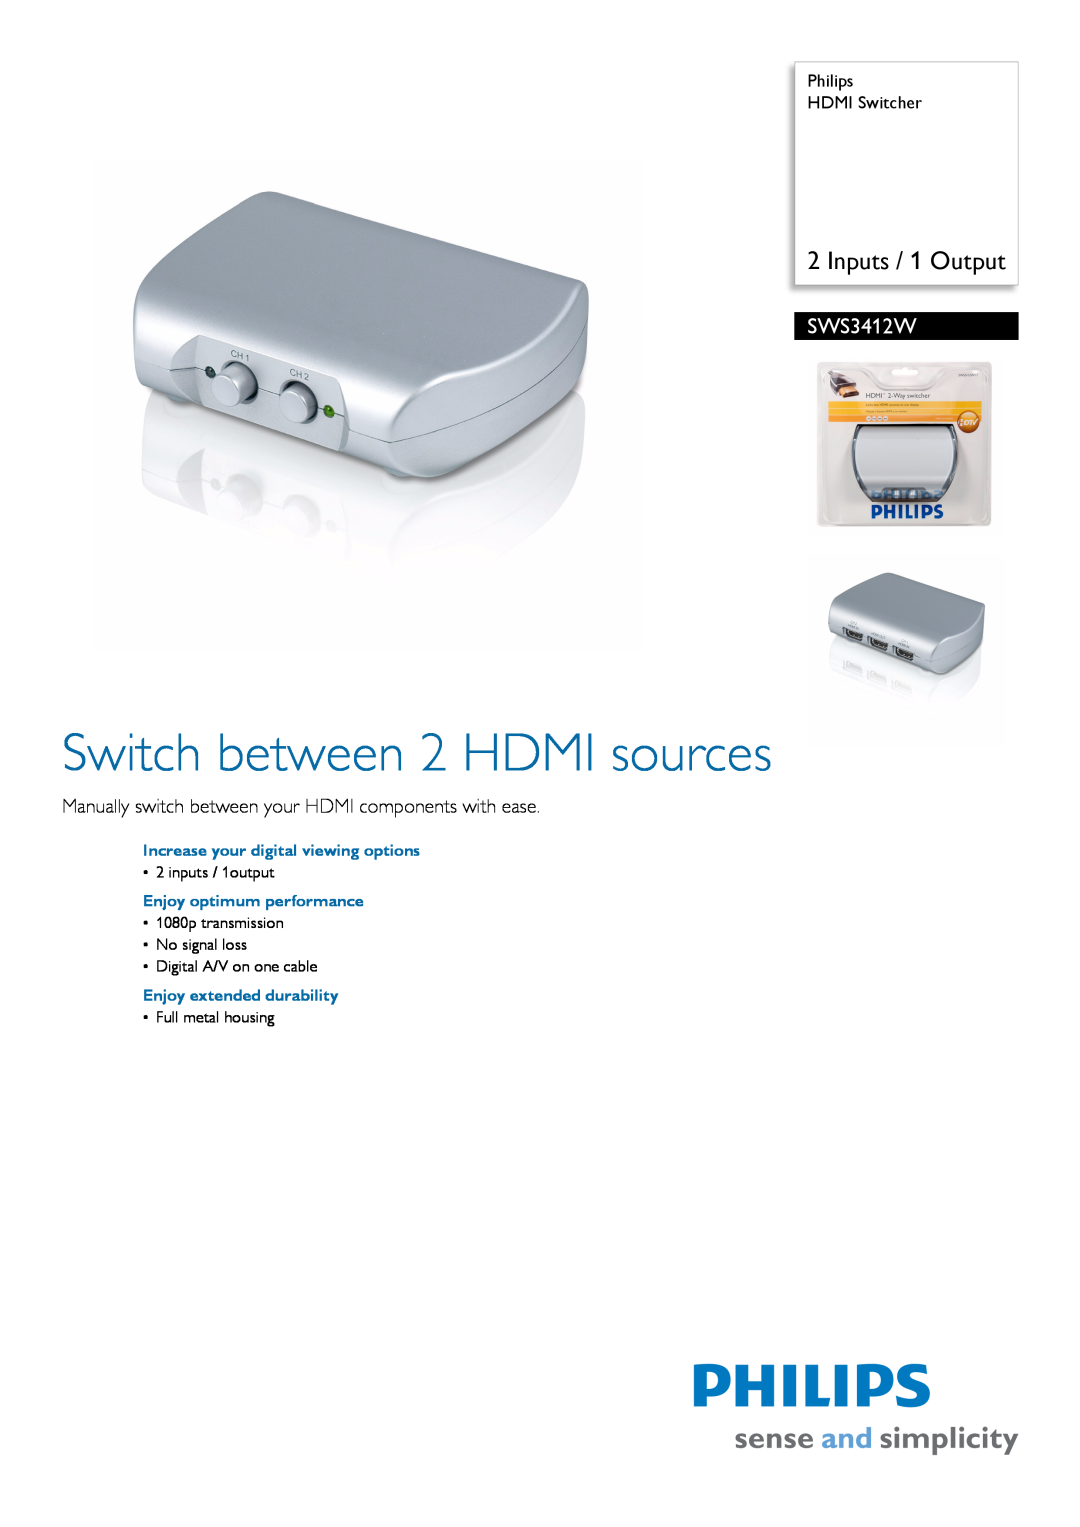 Philips SWS3412W/10 manual Philips HDMI Switcher, Increase your digital viewing options, Enjoy optimum performance 